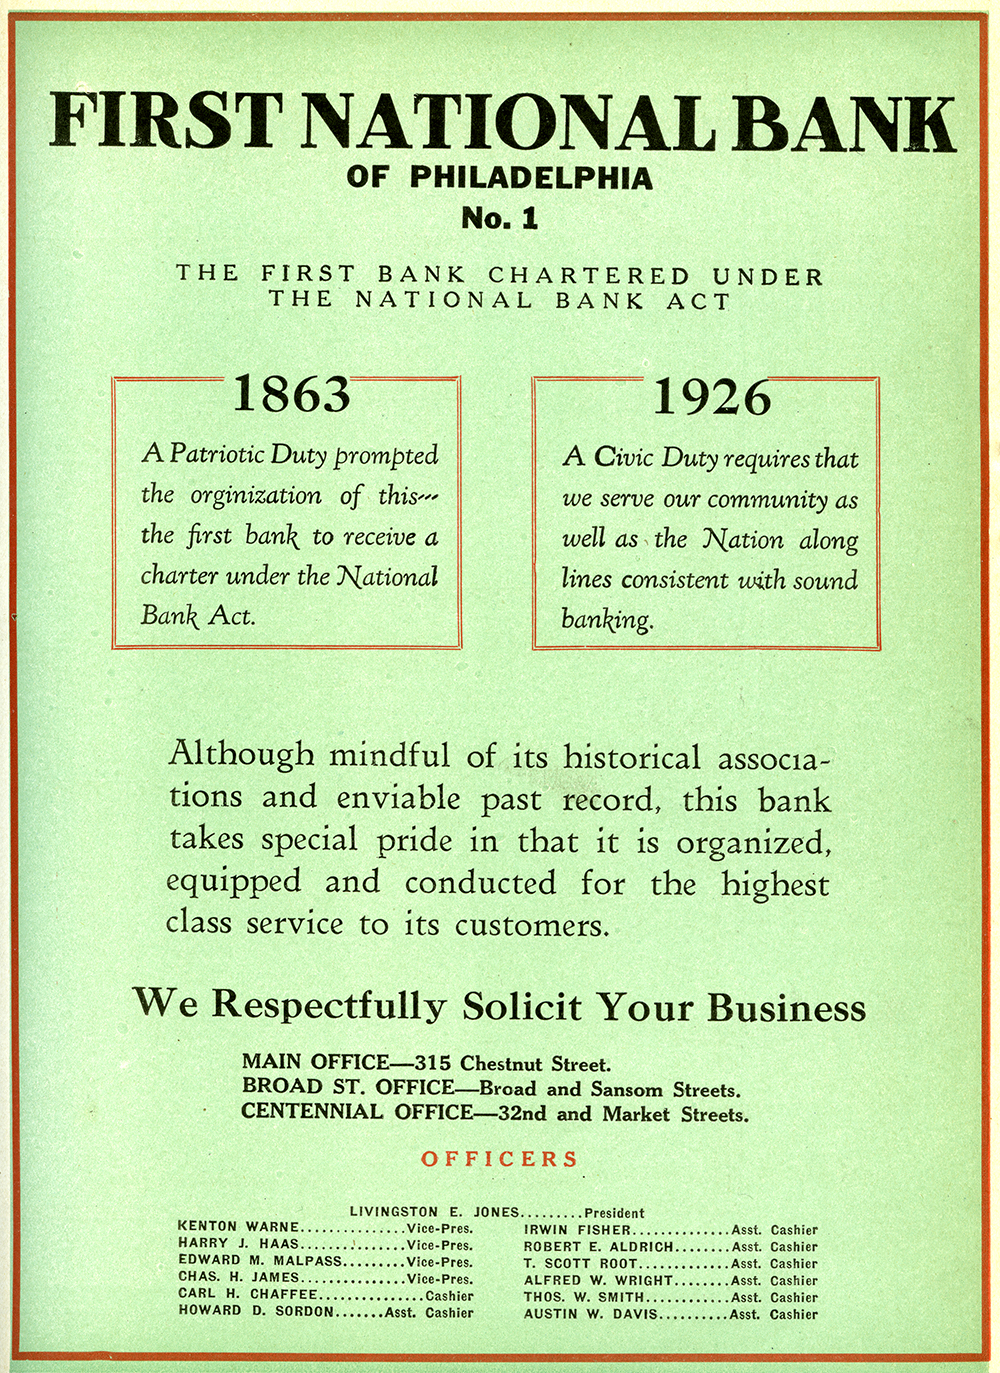 A green advertisement with black lettering for the First National Bank of Philadelphia that reads: The first bank chartered under the National Bank Act.